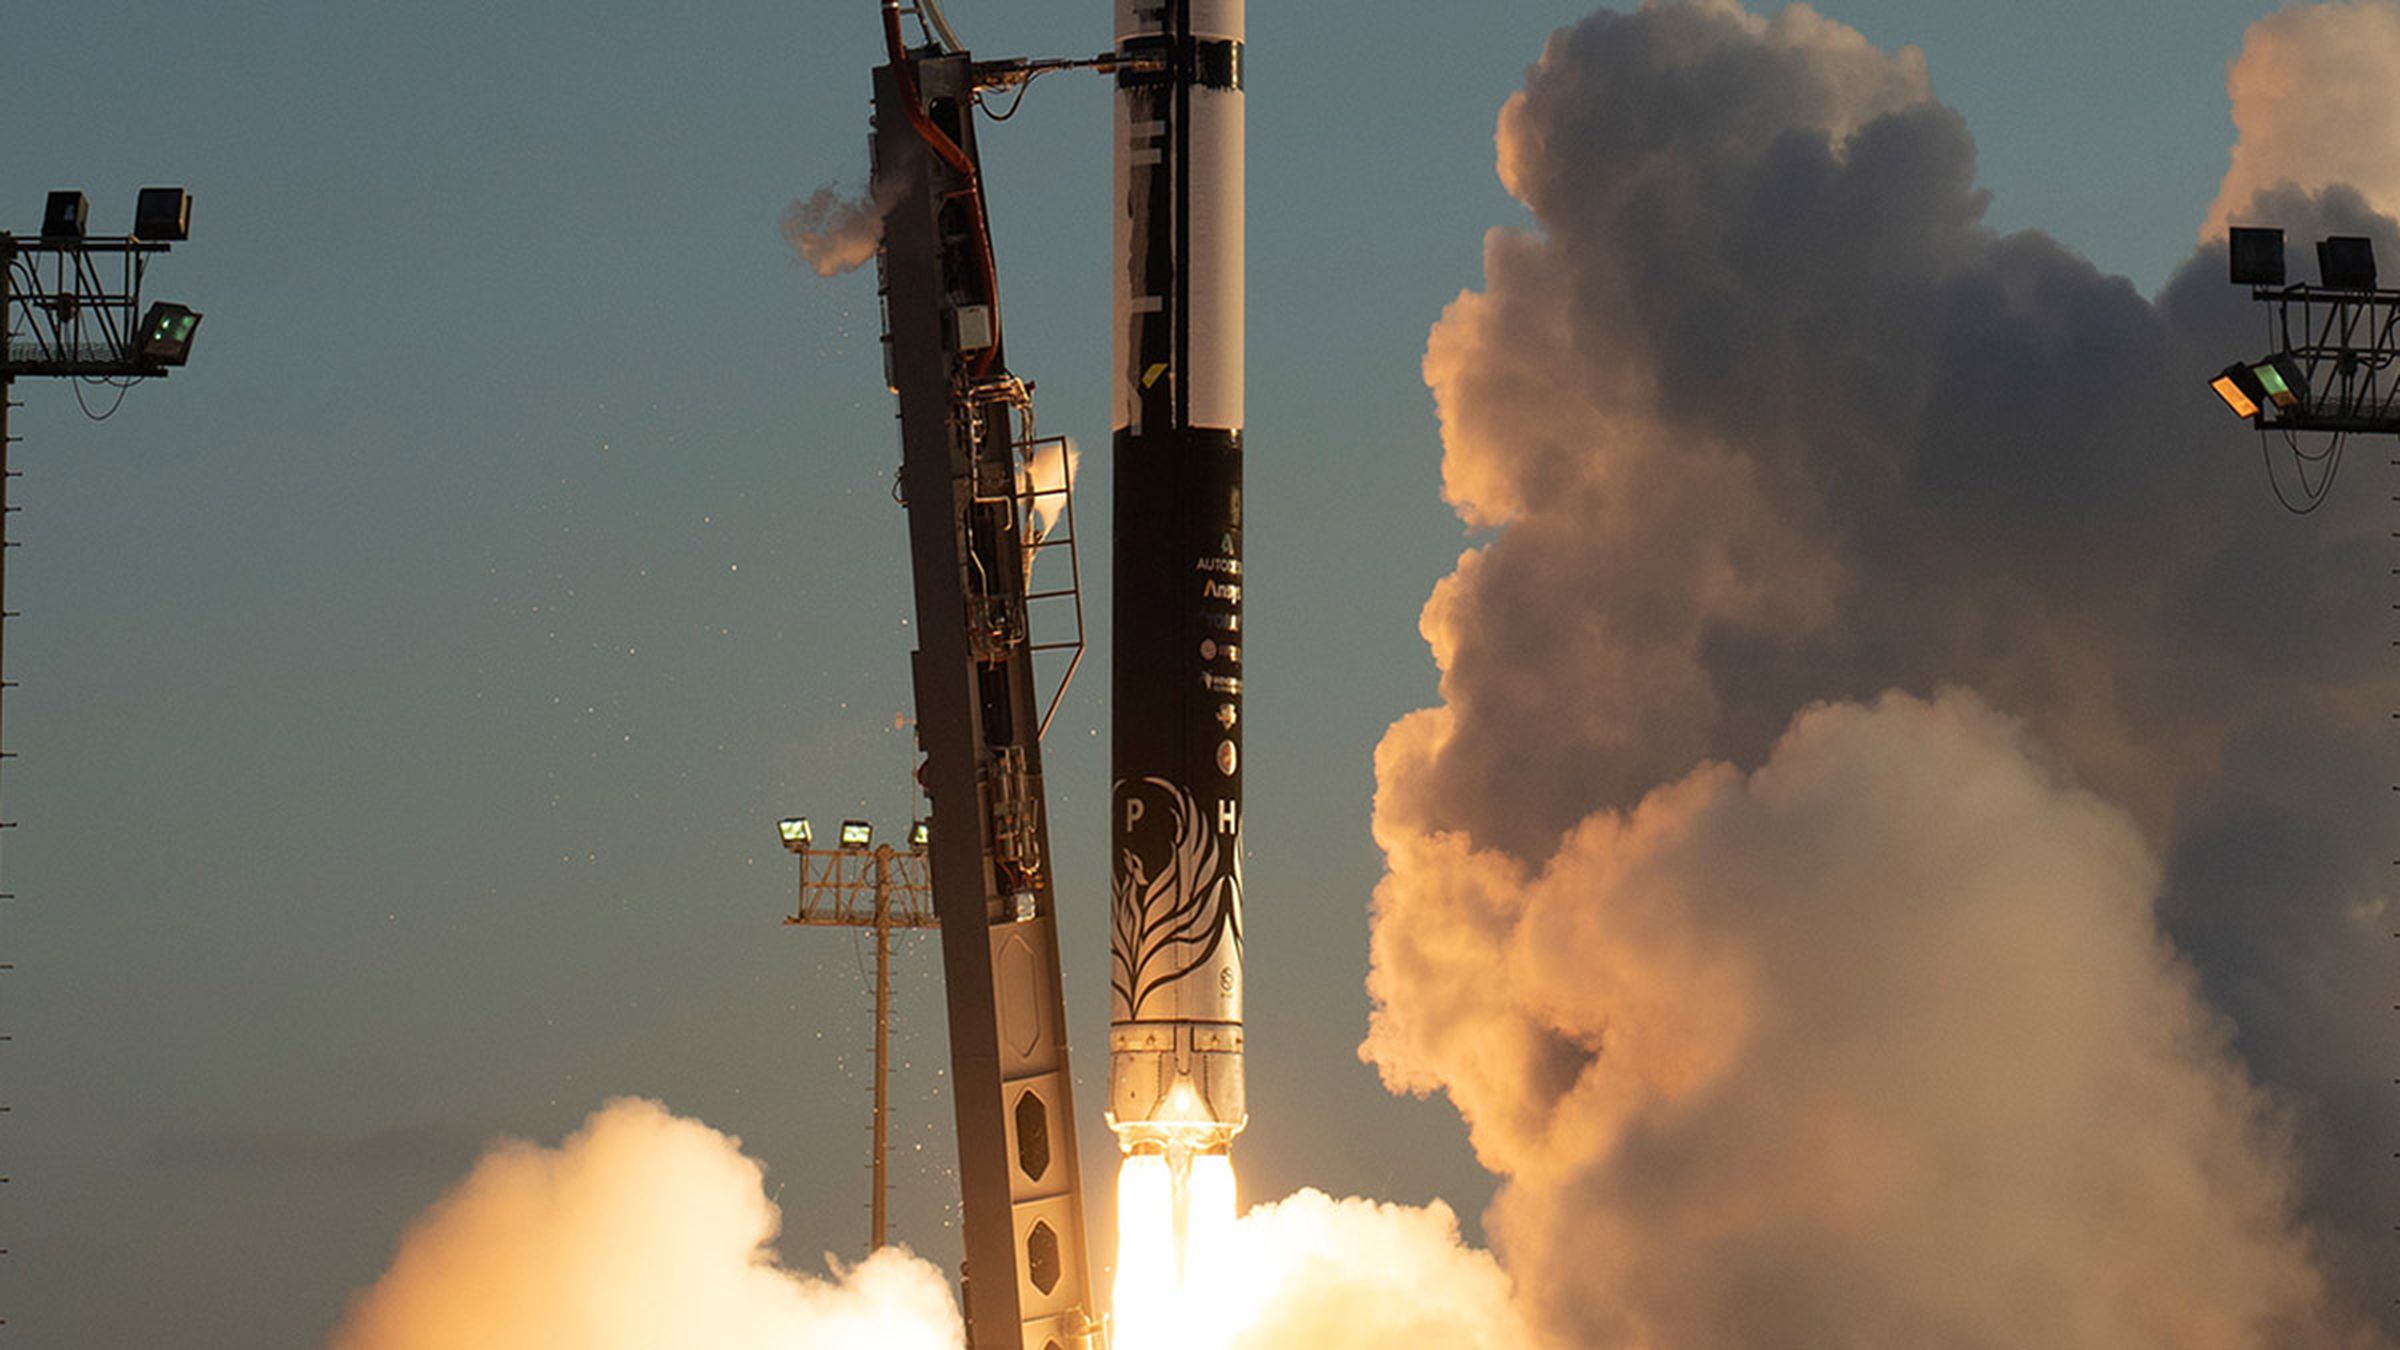 Firefly’s Alpha rocket lifts off for its first launch attempt in September 2021. An engine suddenly shut down over two minutes after liftoff, leading officials to terminate the rocket before reaching space.